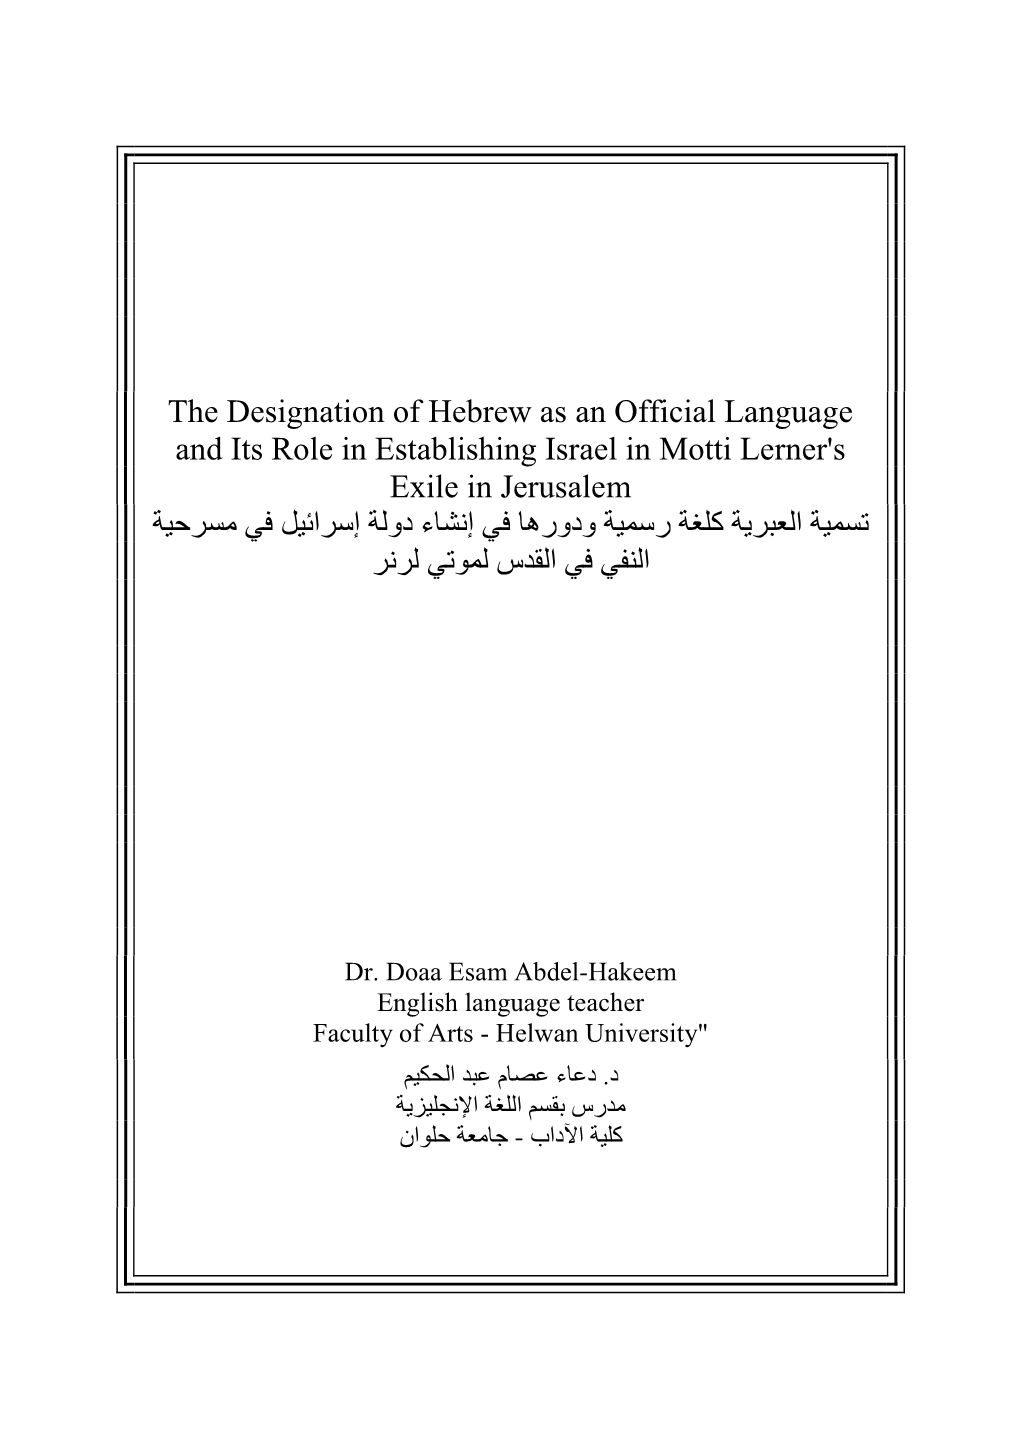 The Designation of Hebrew As an Official Language and Its Role In